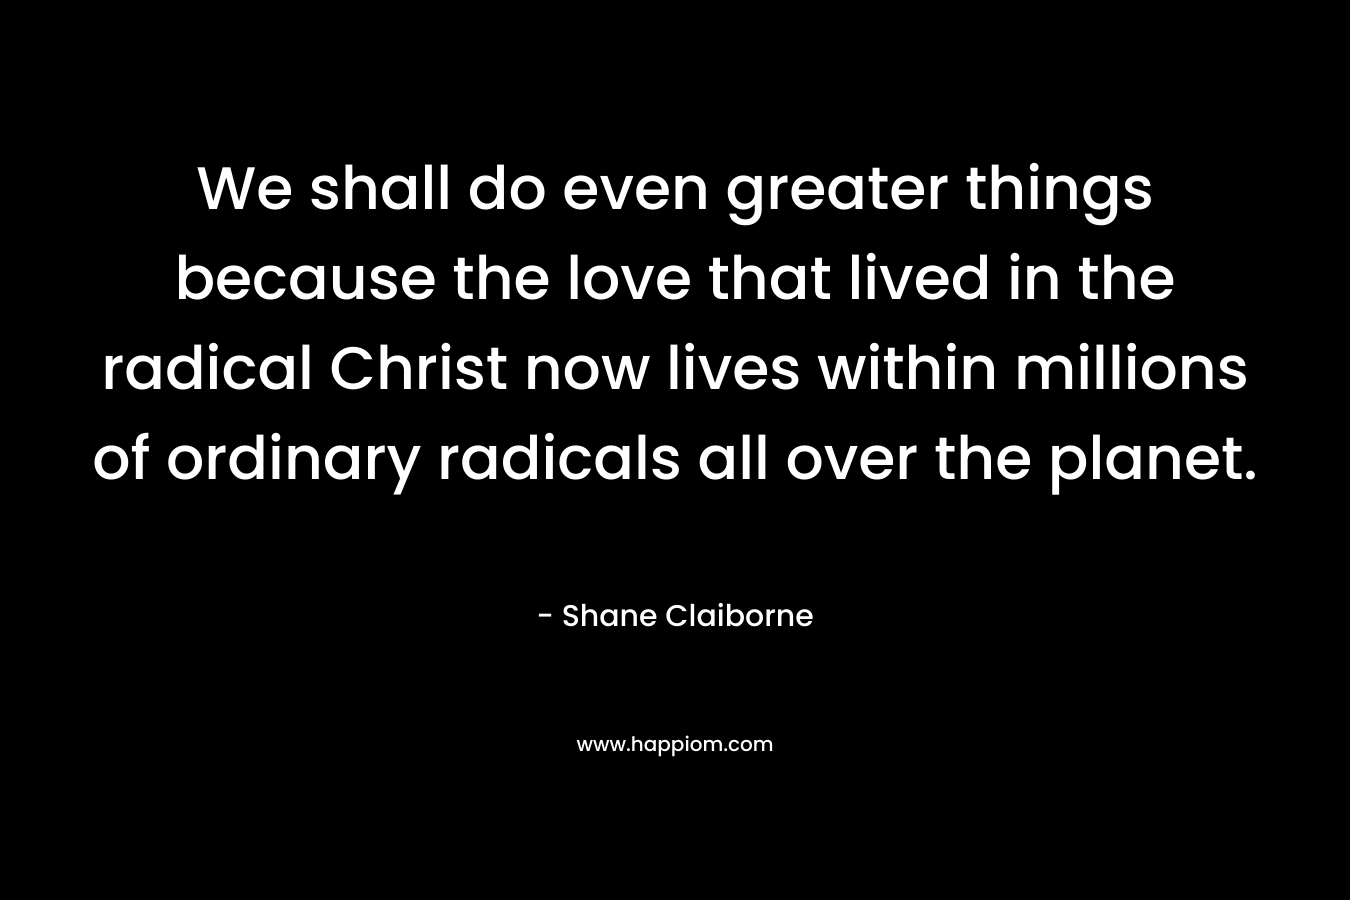 We shall do even greater things because the love that lived in the radical Christ now lives within millions of ordinary radicals all over the planet.